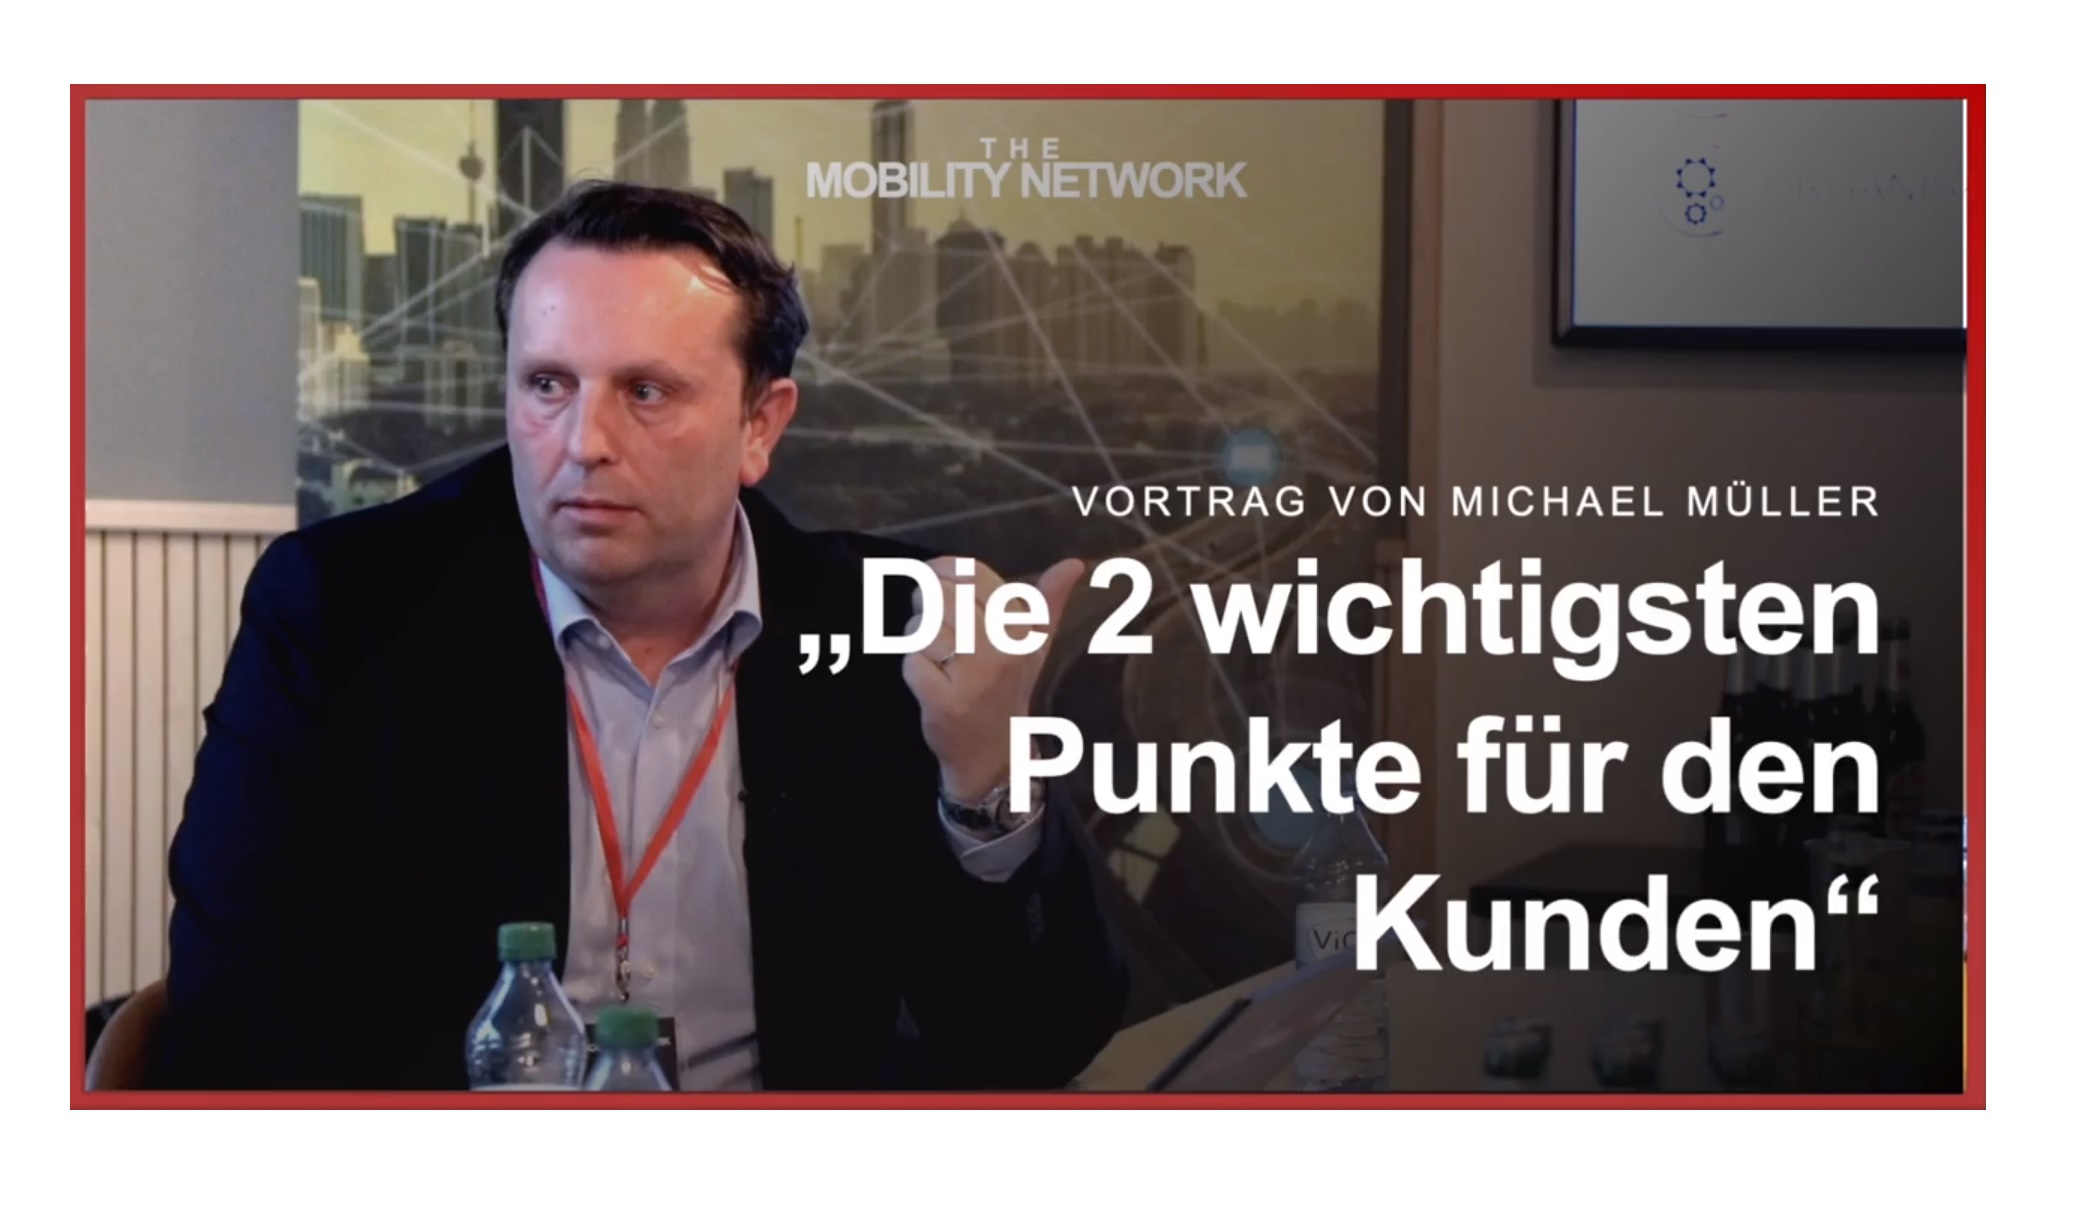 What is important for companies and employees? Speech from Michael Müller